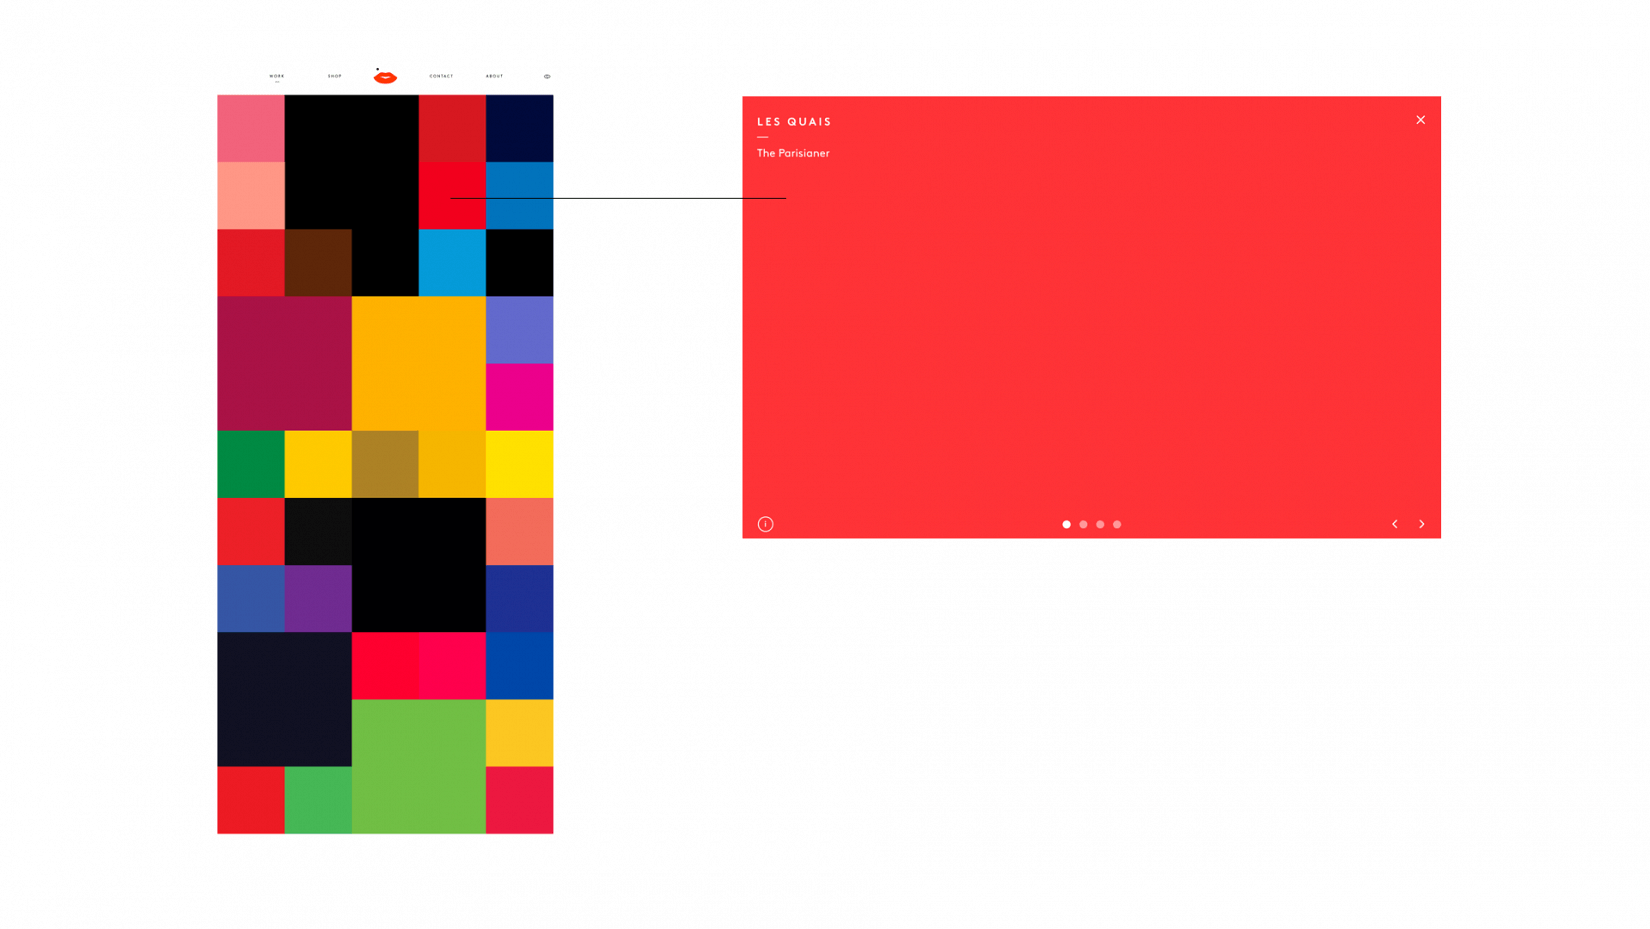 Colours used in the site